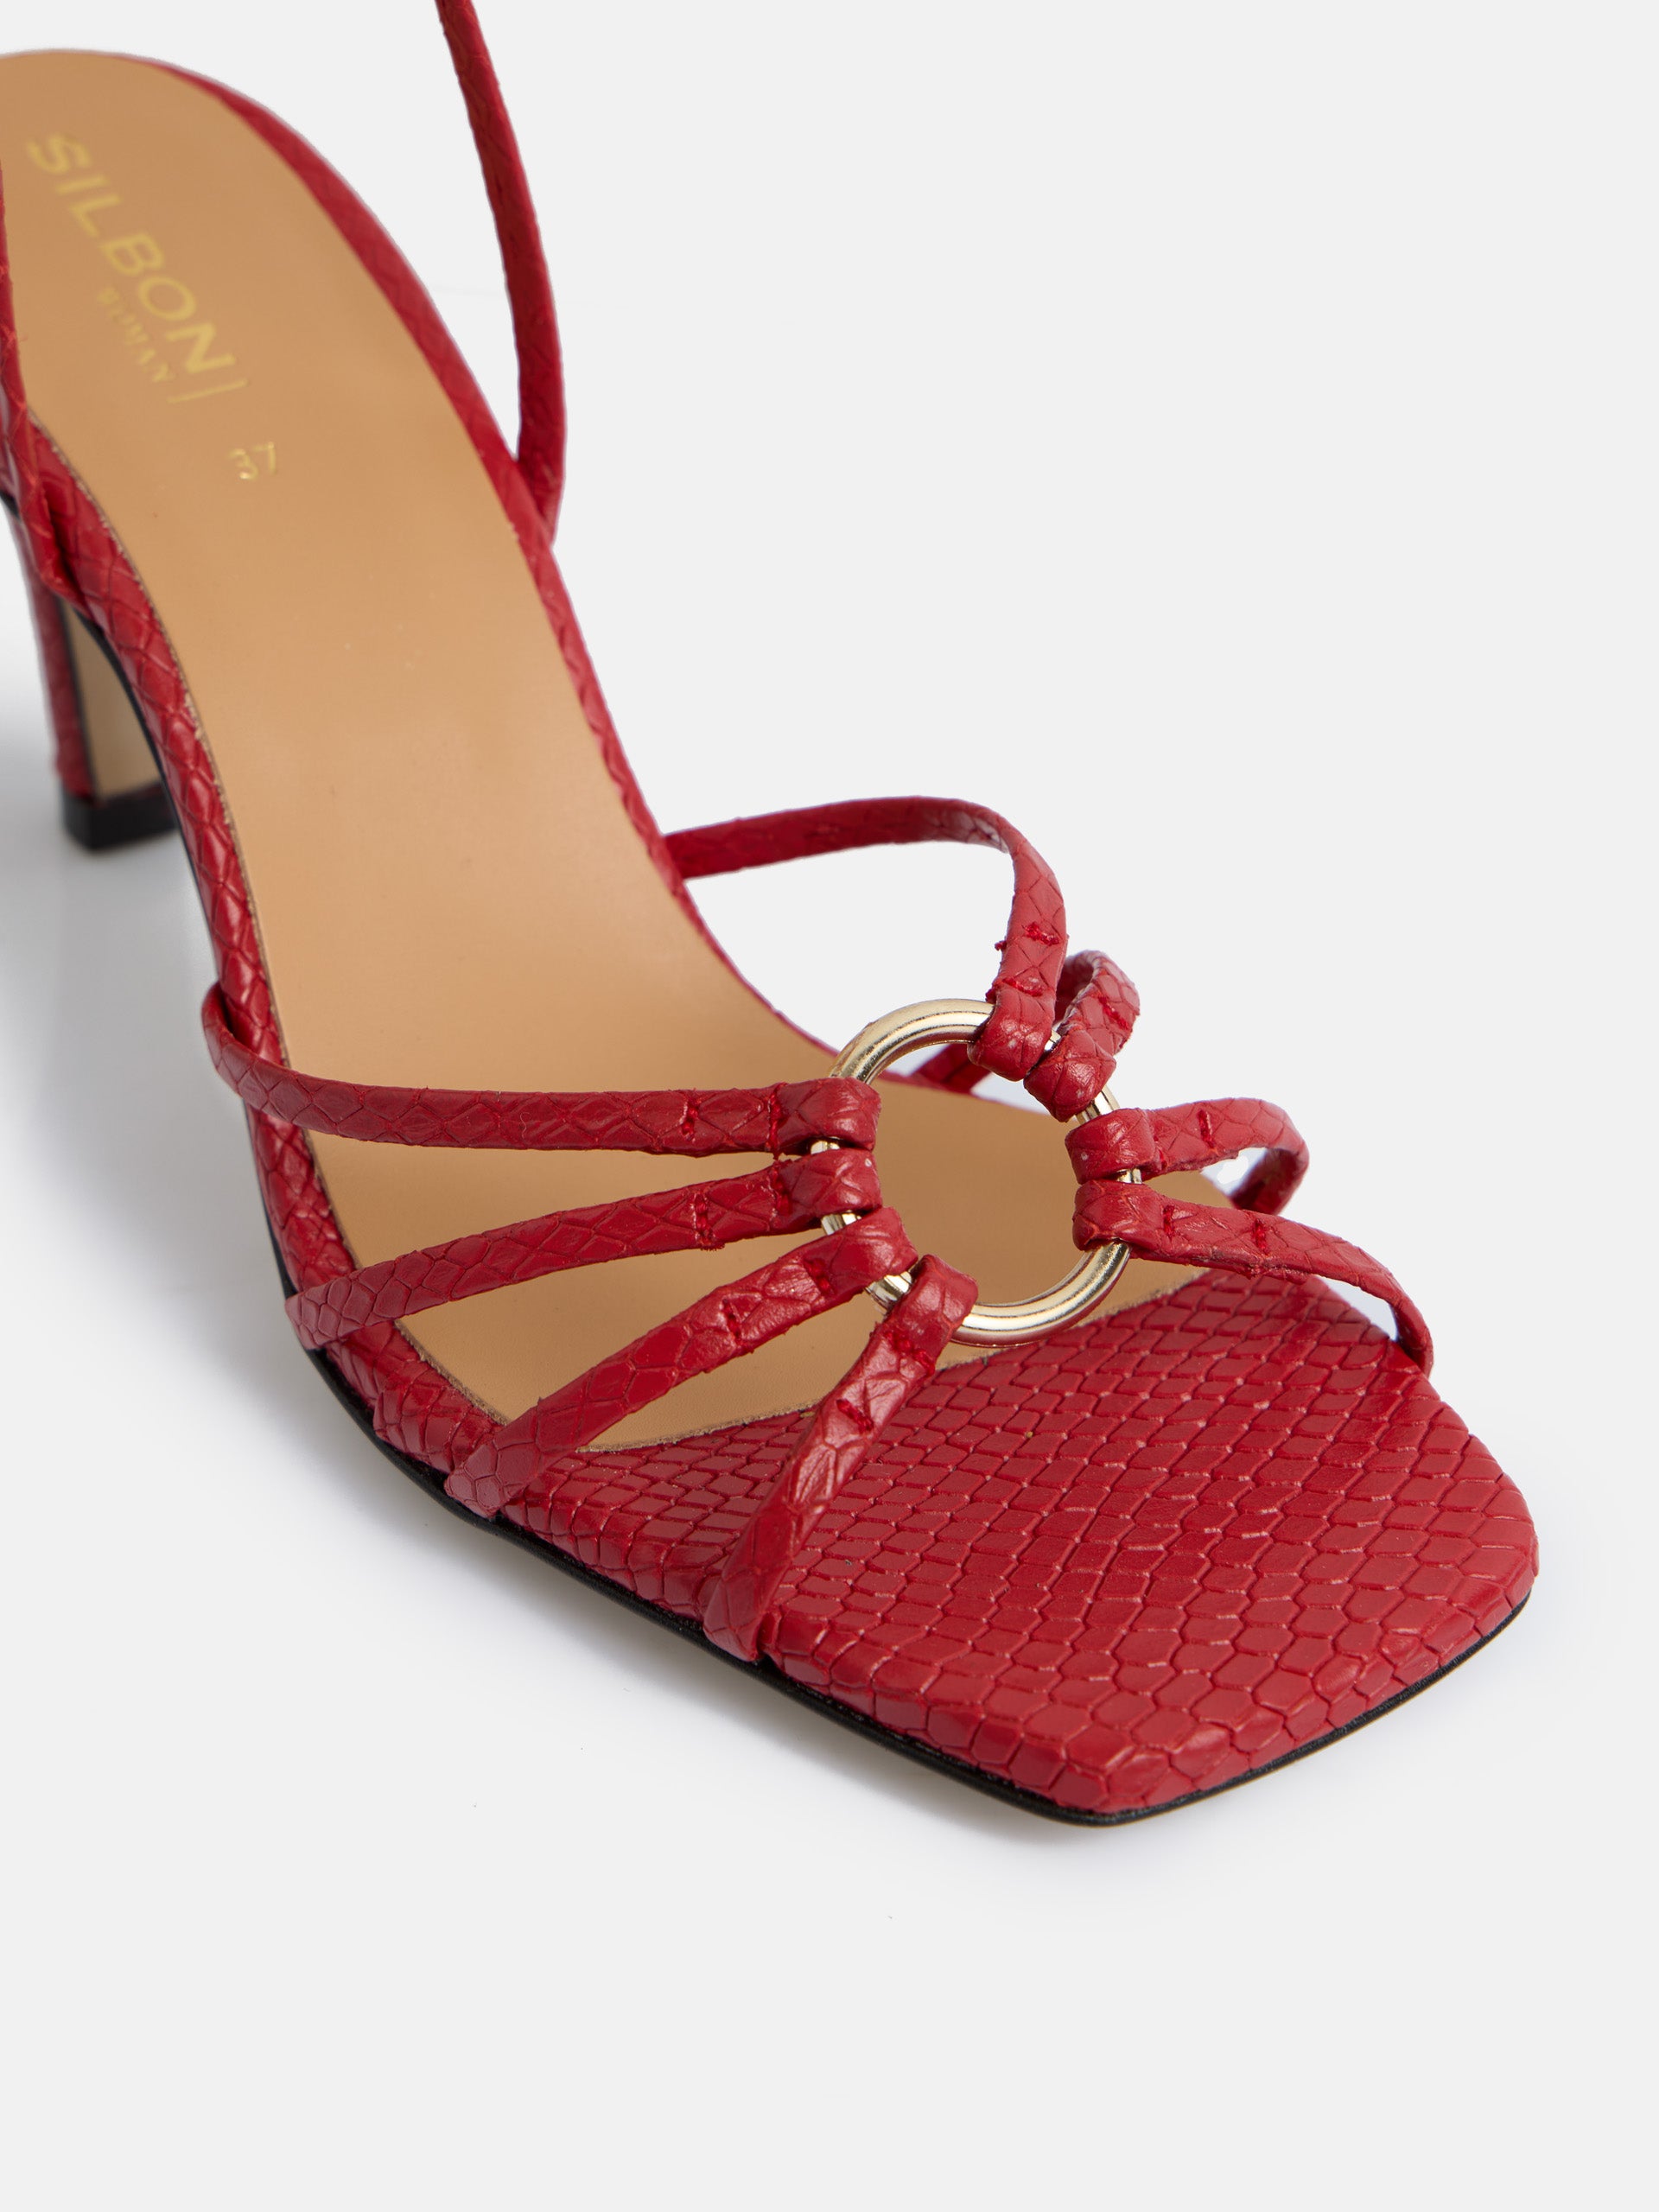 Unique woman sandal with red leather heel